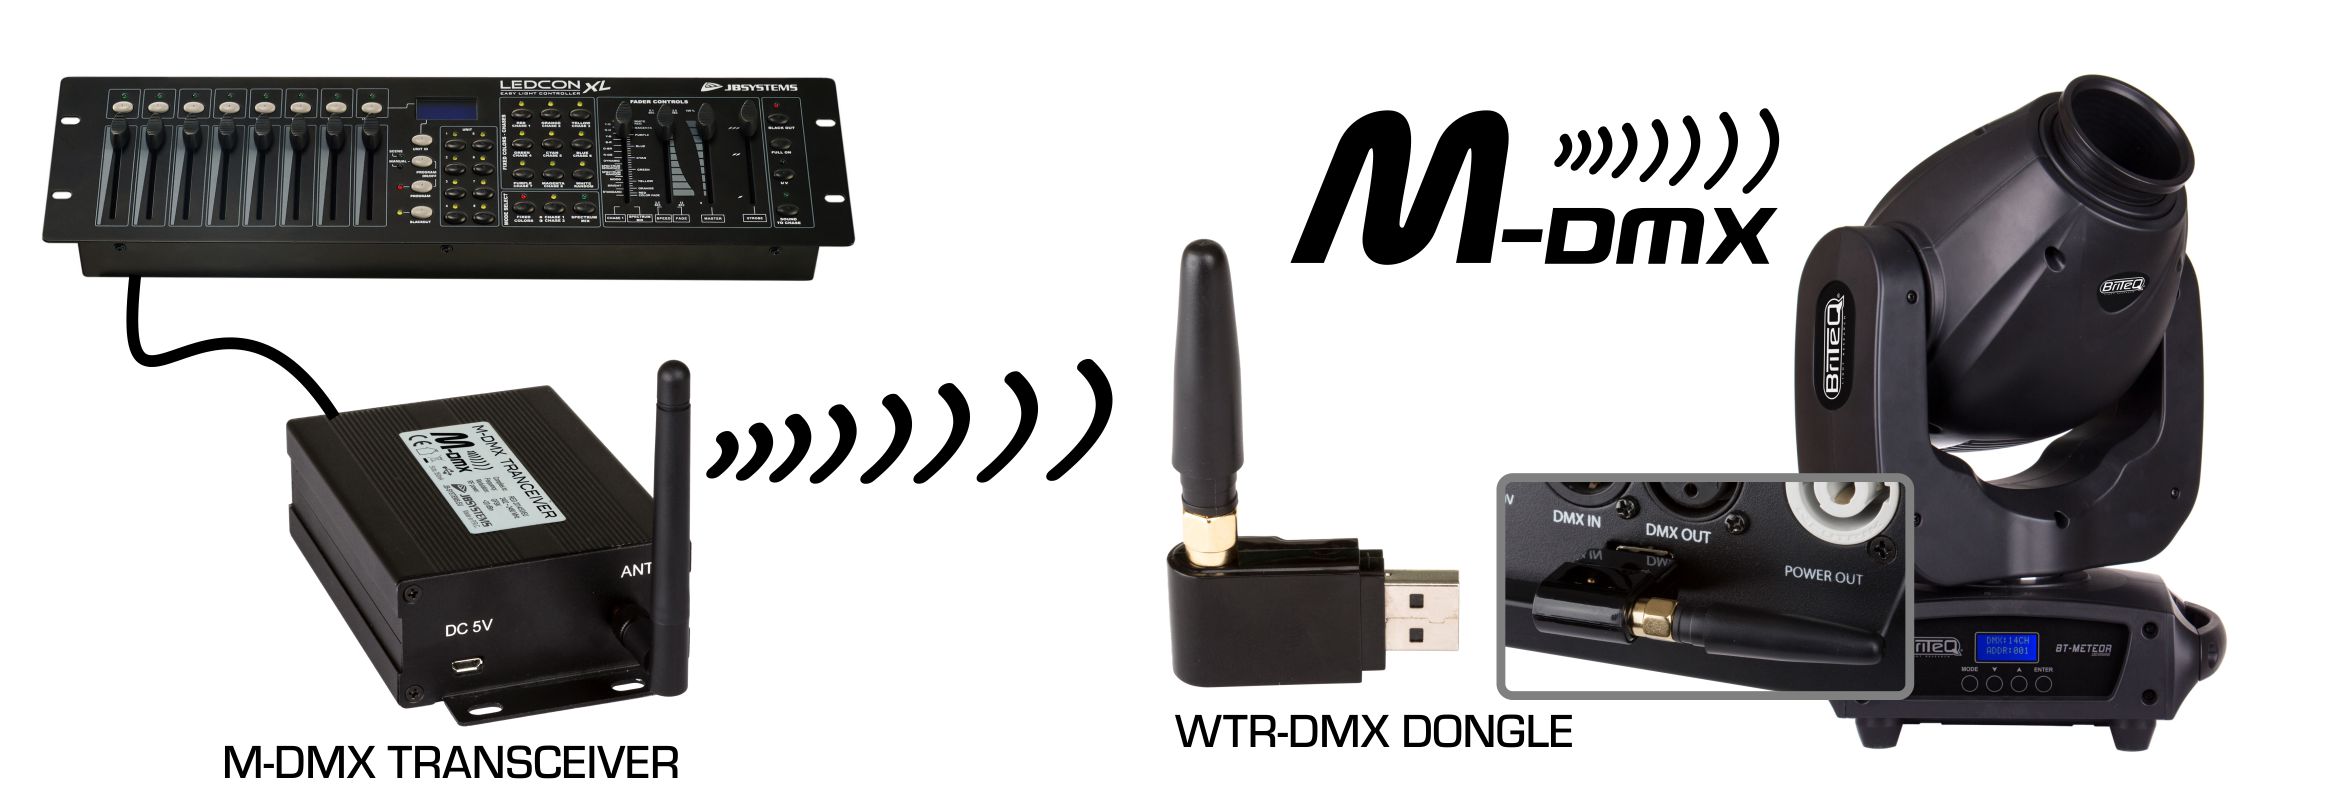 The perfect solution when wireless DMX with maximum reliability is needed!